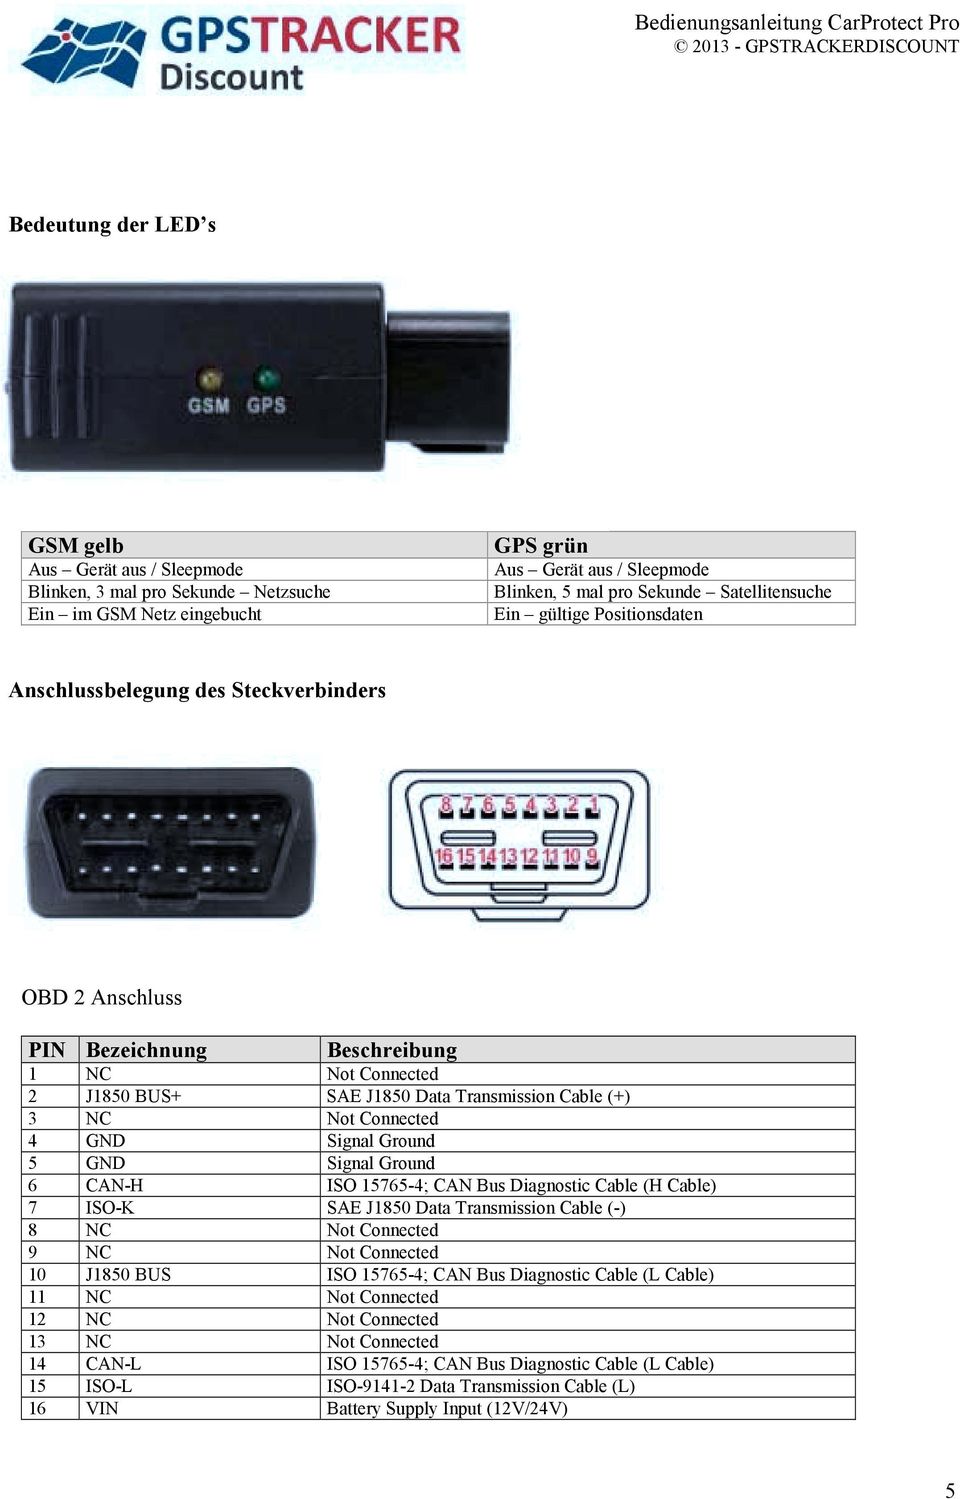 4 GND Signal Ground 5 GND Signal Ground 6 CAN-H ISO 15765-4; CAN Bus Diagnostic Cable (H Cable) 7 ISO-K SAE J1850 Data Transmission Cable (-) 8 NC Not Connected 9 NC Not Connected 10 J1850 BUS ISO